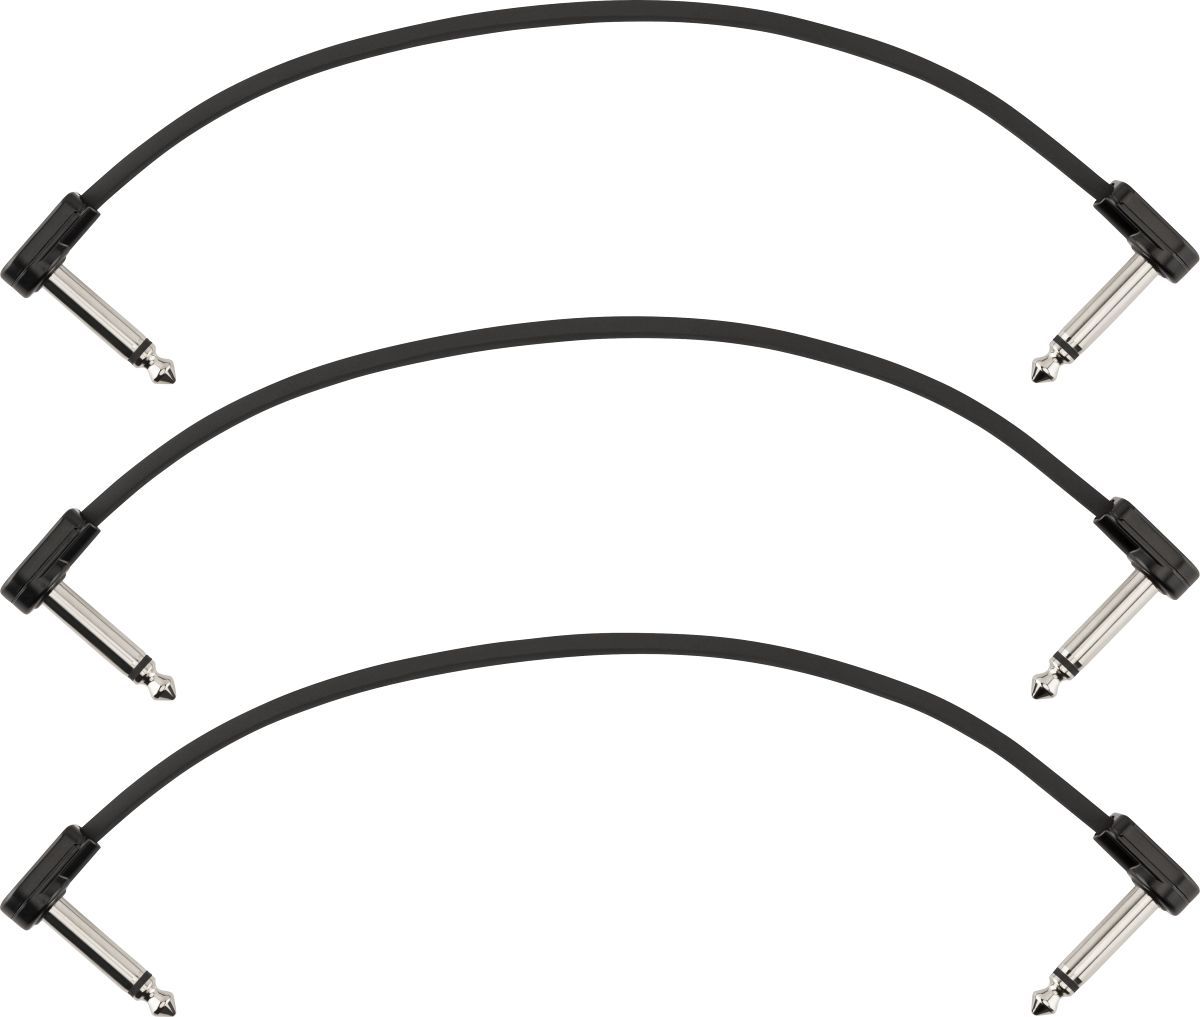 Fender 8' Blockchain Patch Cable 3-PACK